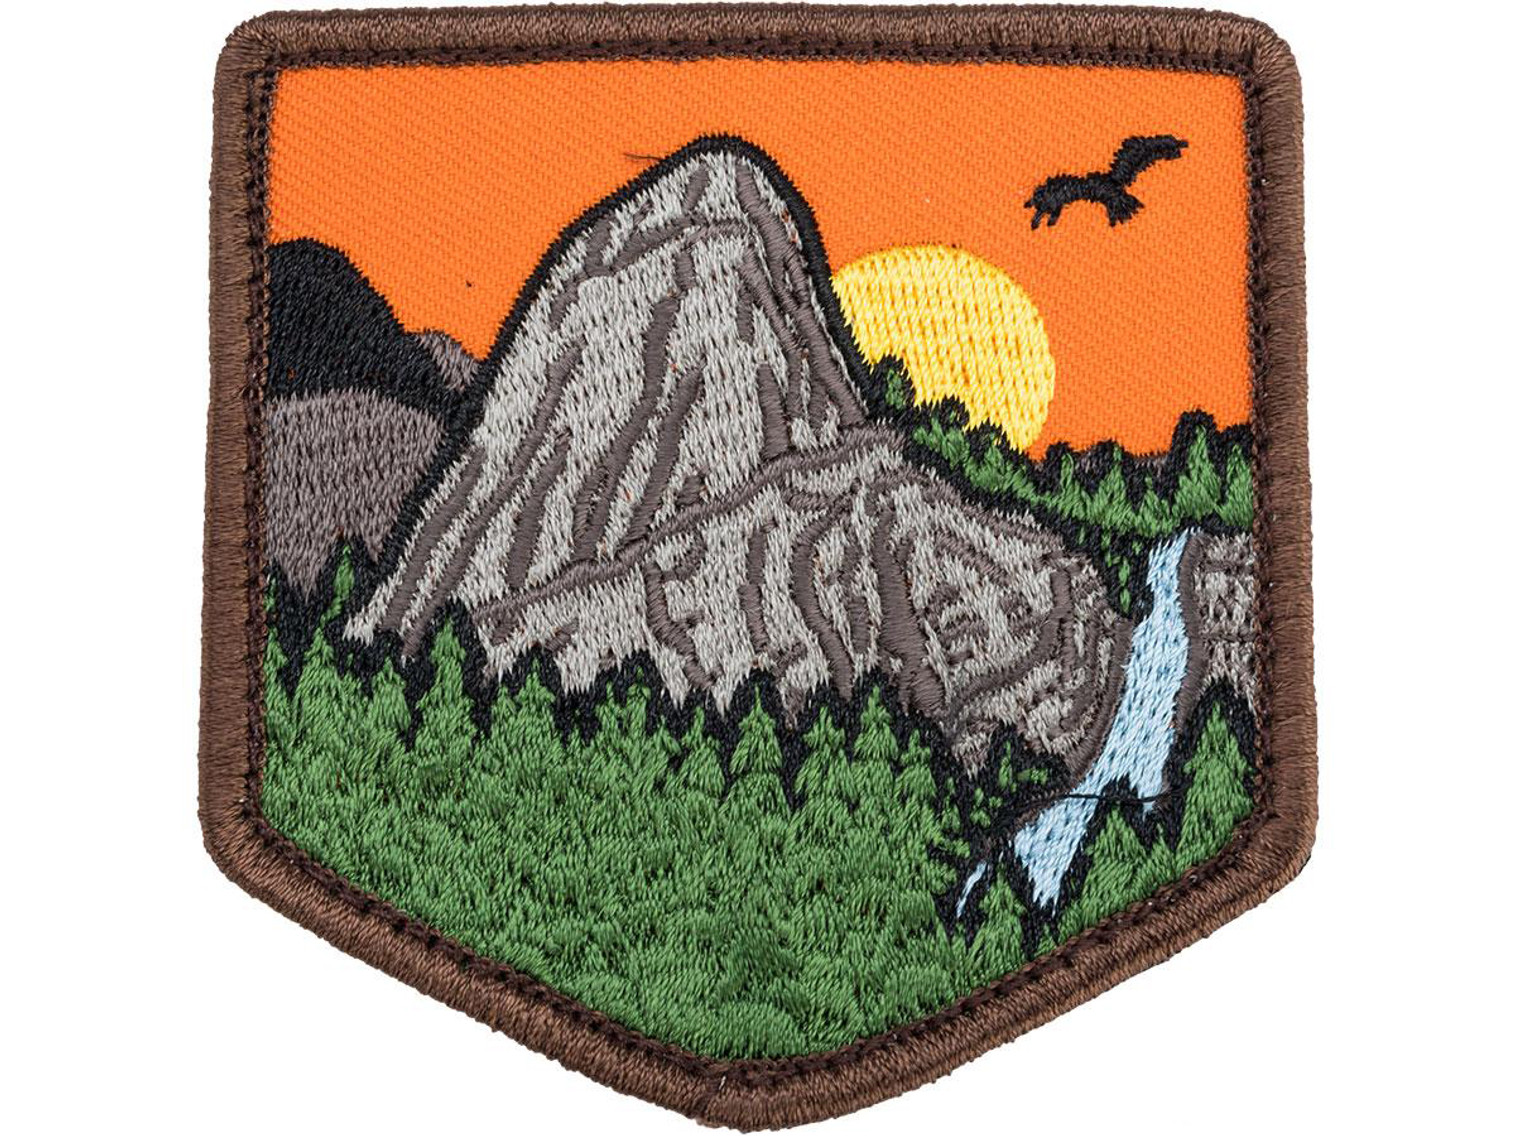 Mil-Spec Monkey "Mountain Adventure 1" Embroidered Morale Patch (Color: Full Color)